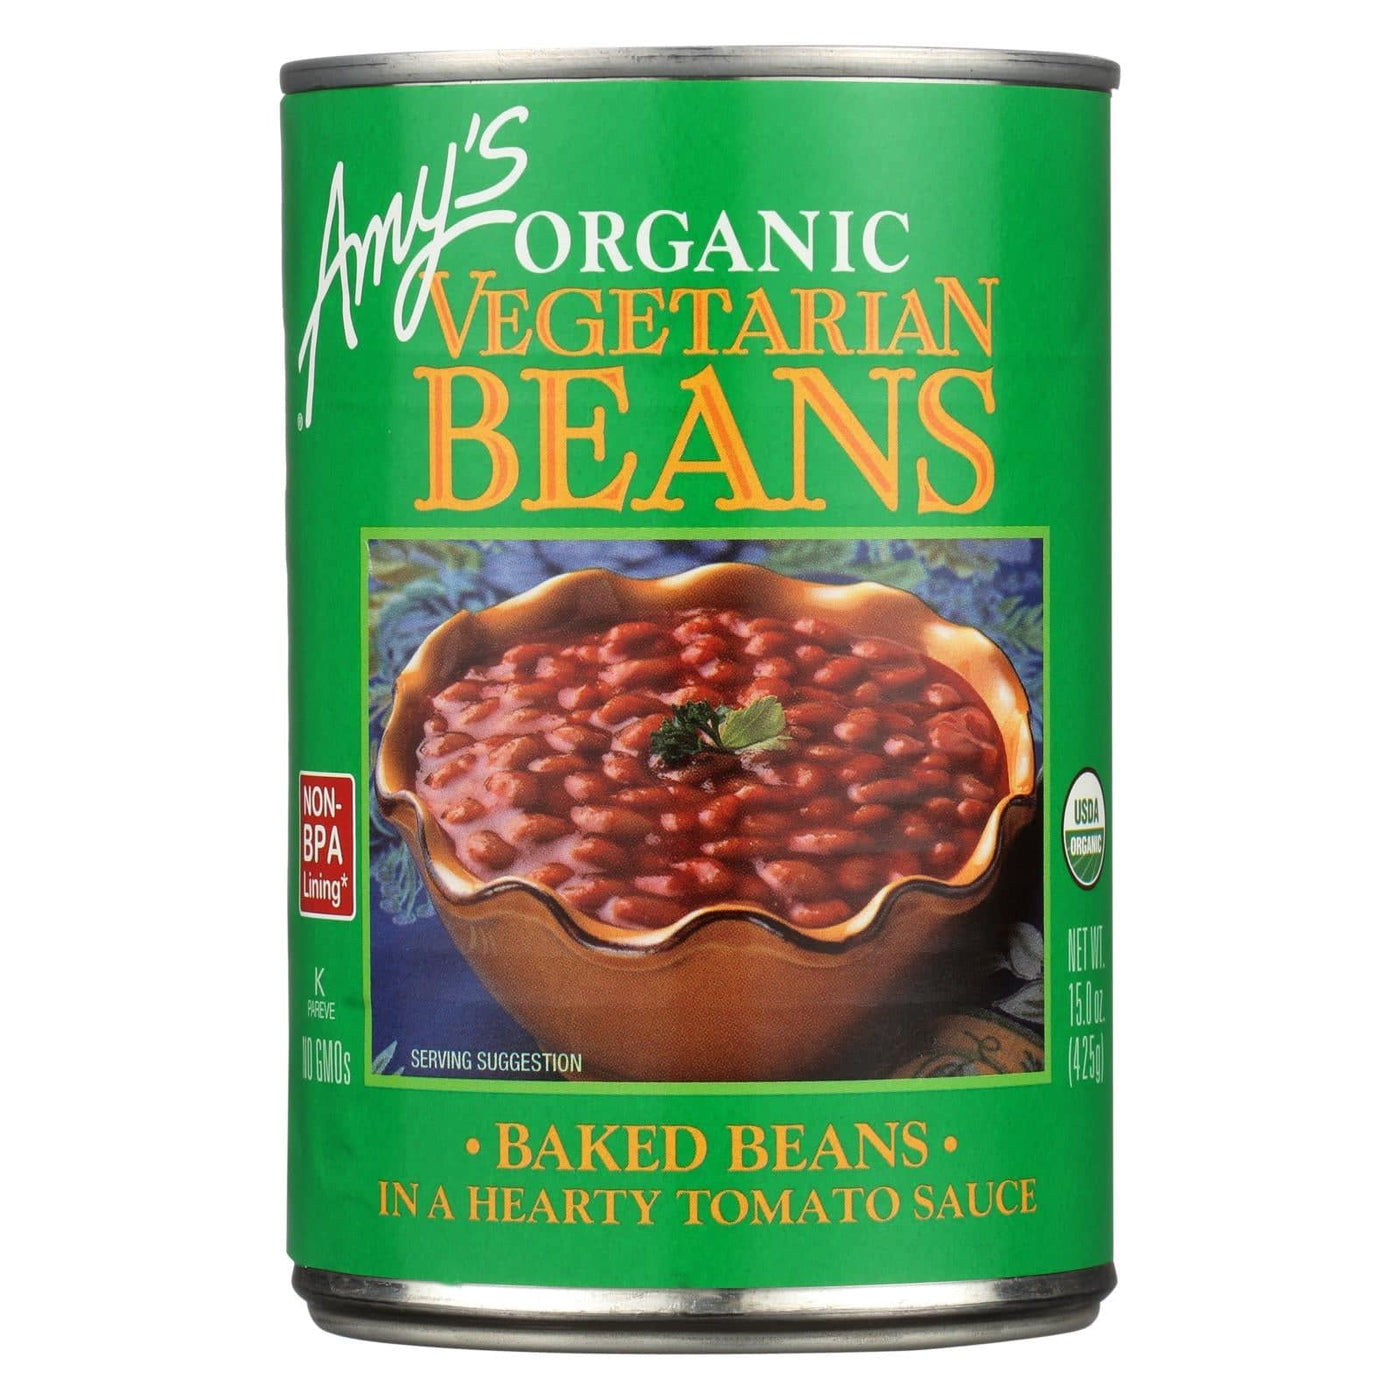 Buy Amy's - Organic Vegetarian Baked Beans - Case Of 12 - 15 Oz.  at OnlyNaturals.us